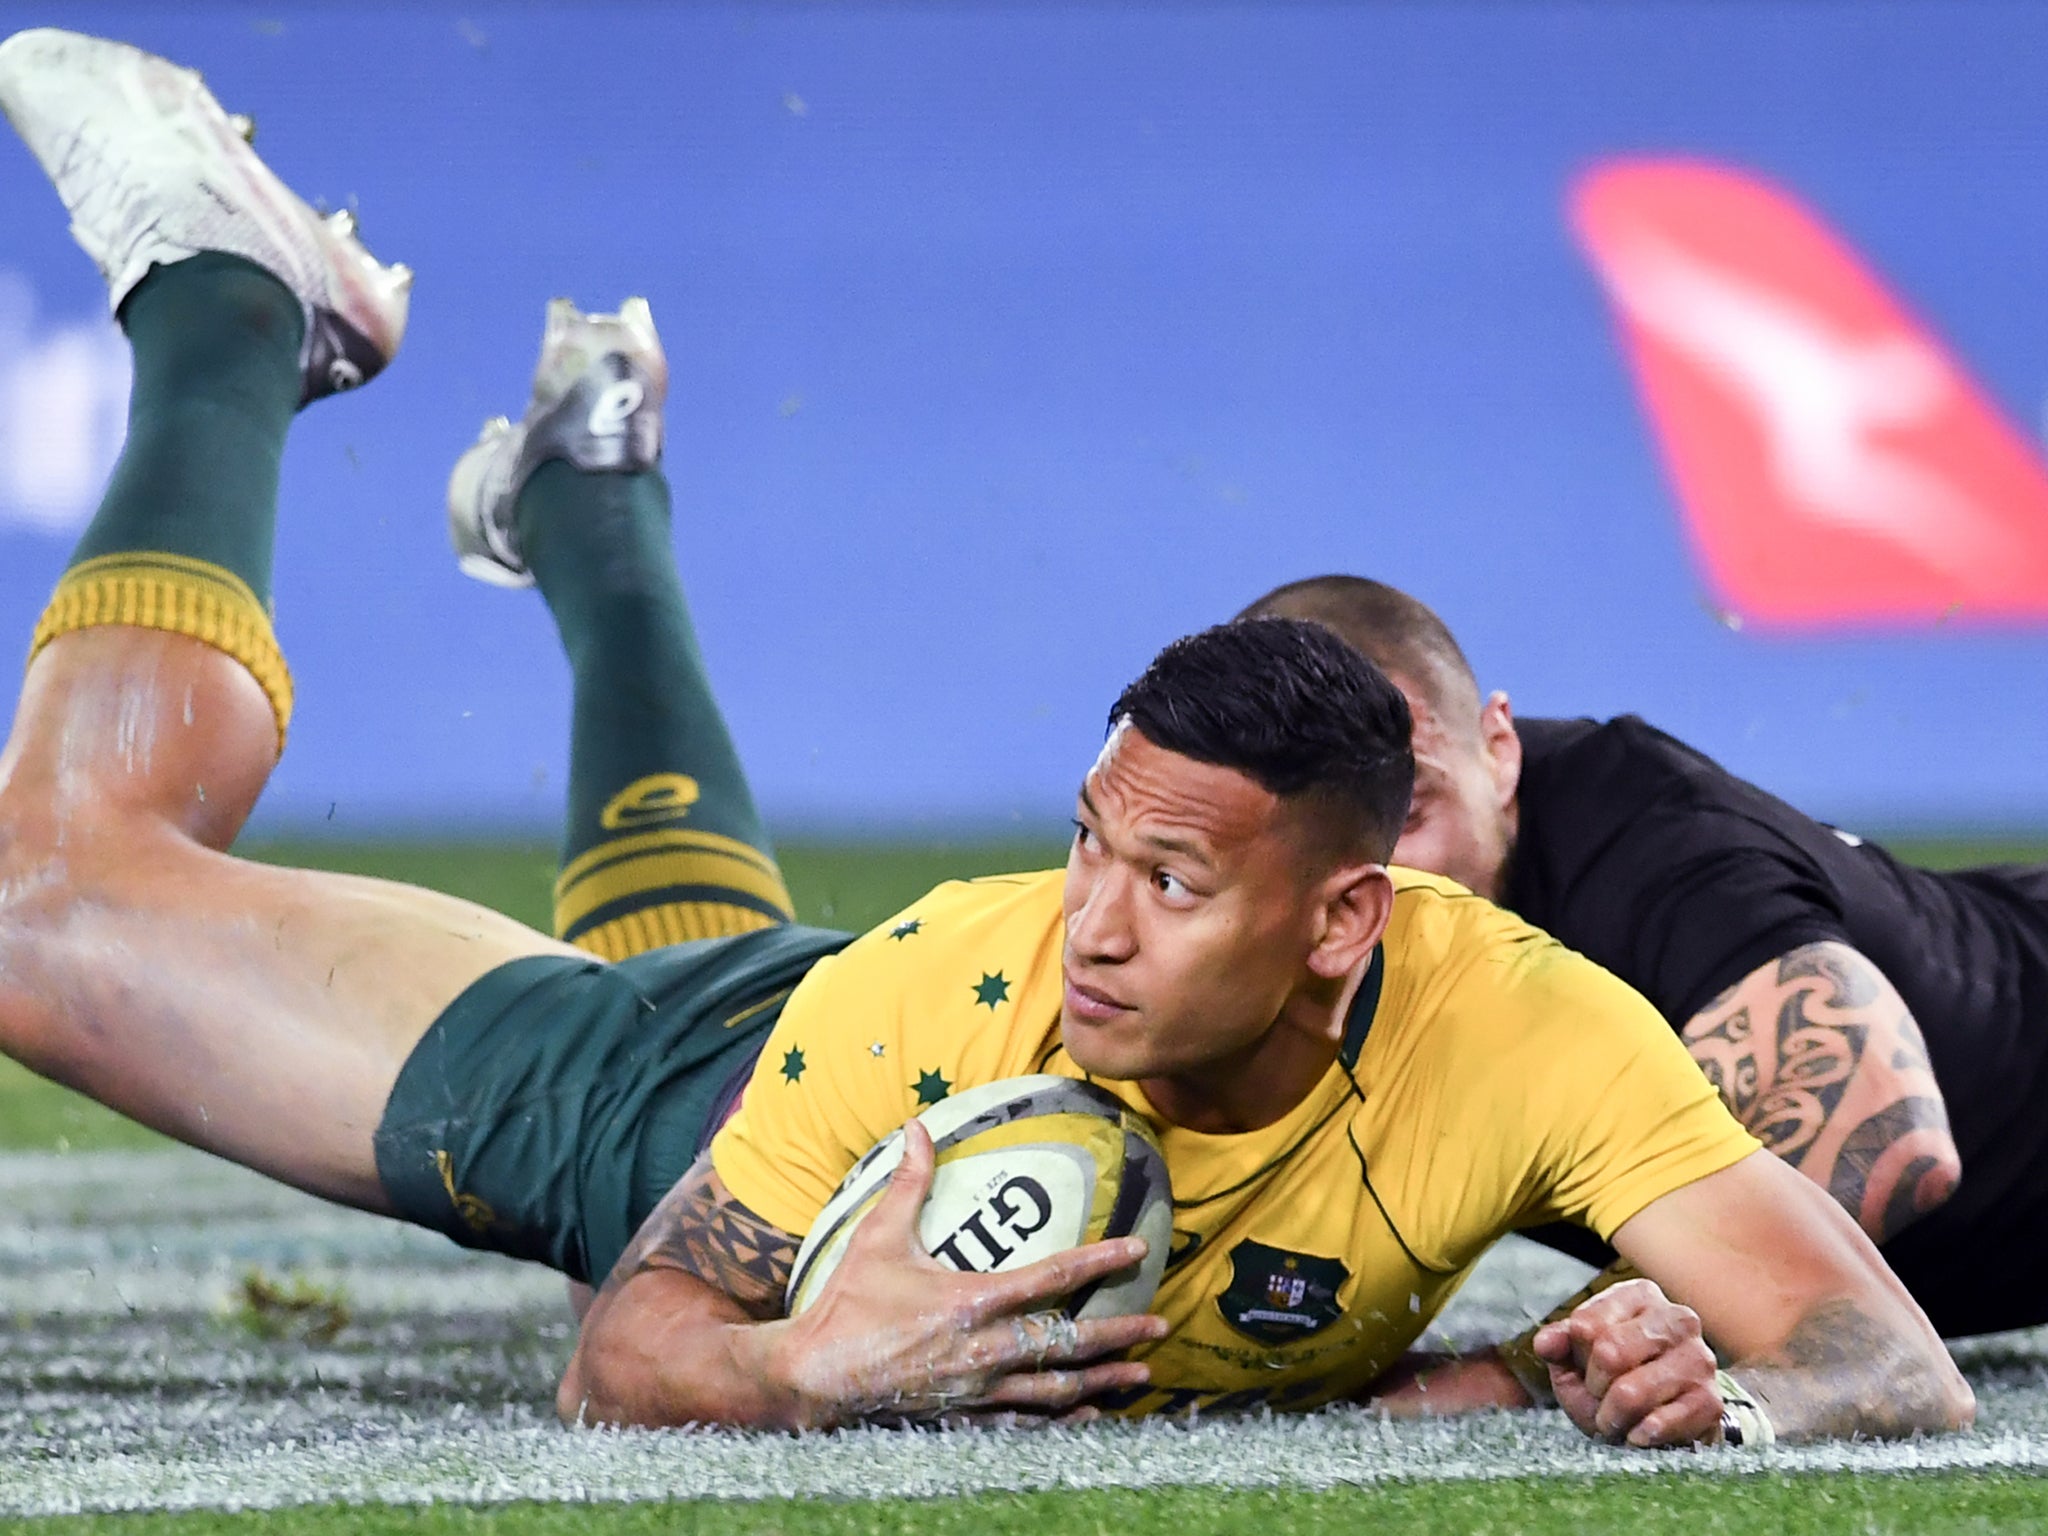 &#13;
Australia outscored New Zealand 28-14 in the second half in Sydney &#13;